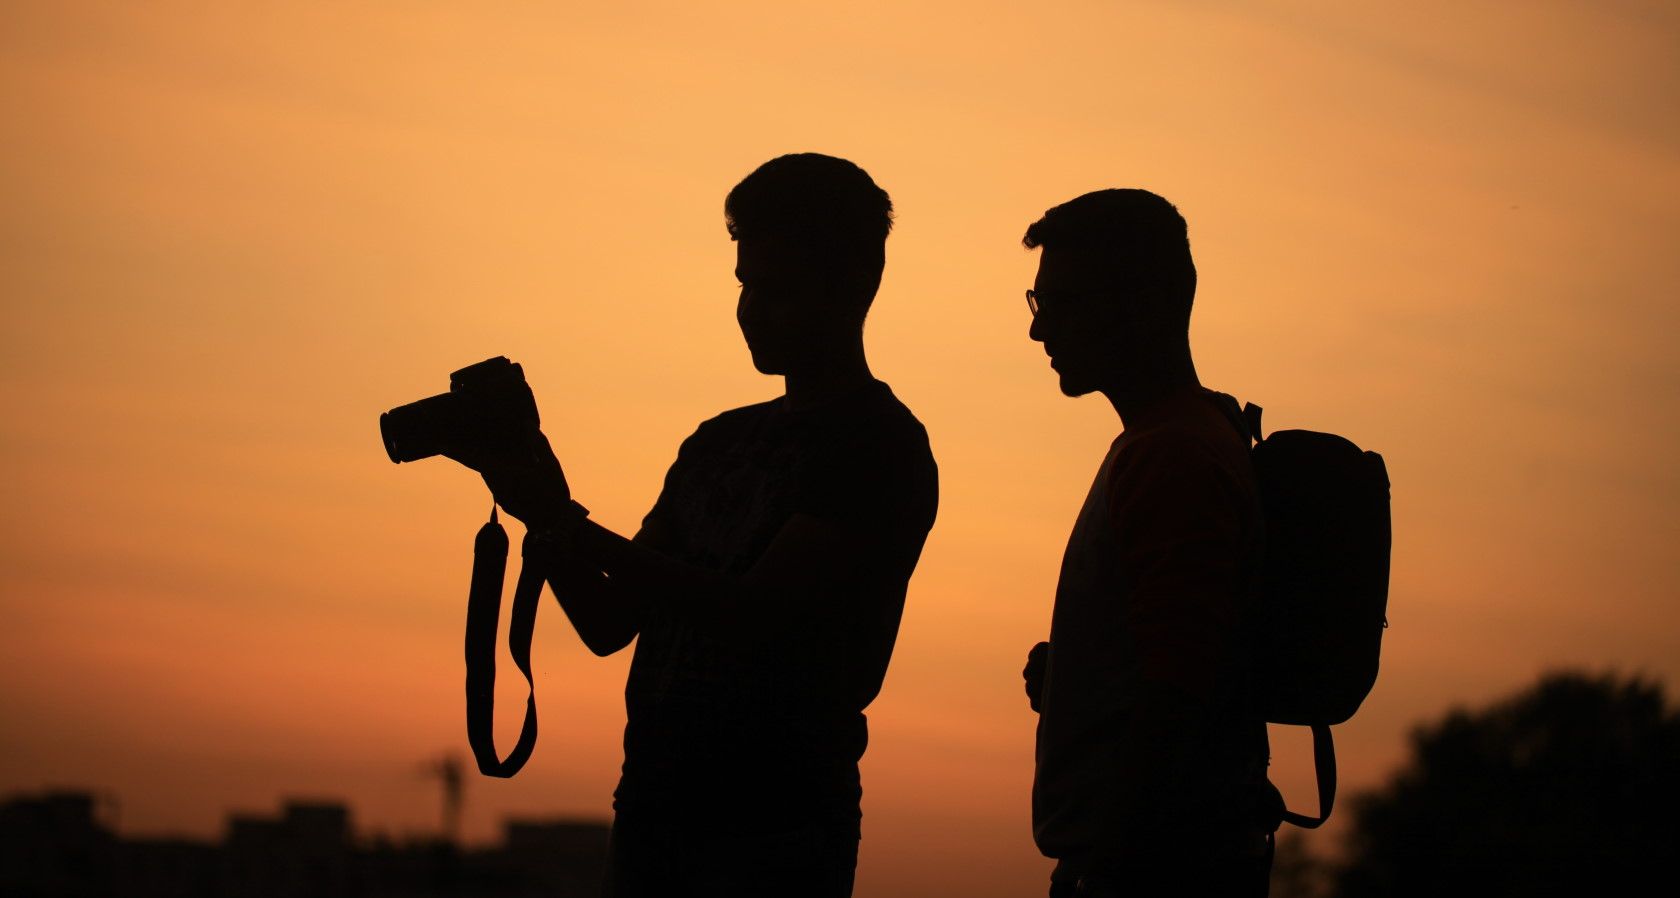 Silhouette of two photographers standing outside holding camera